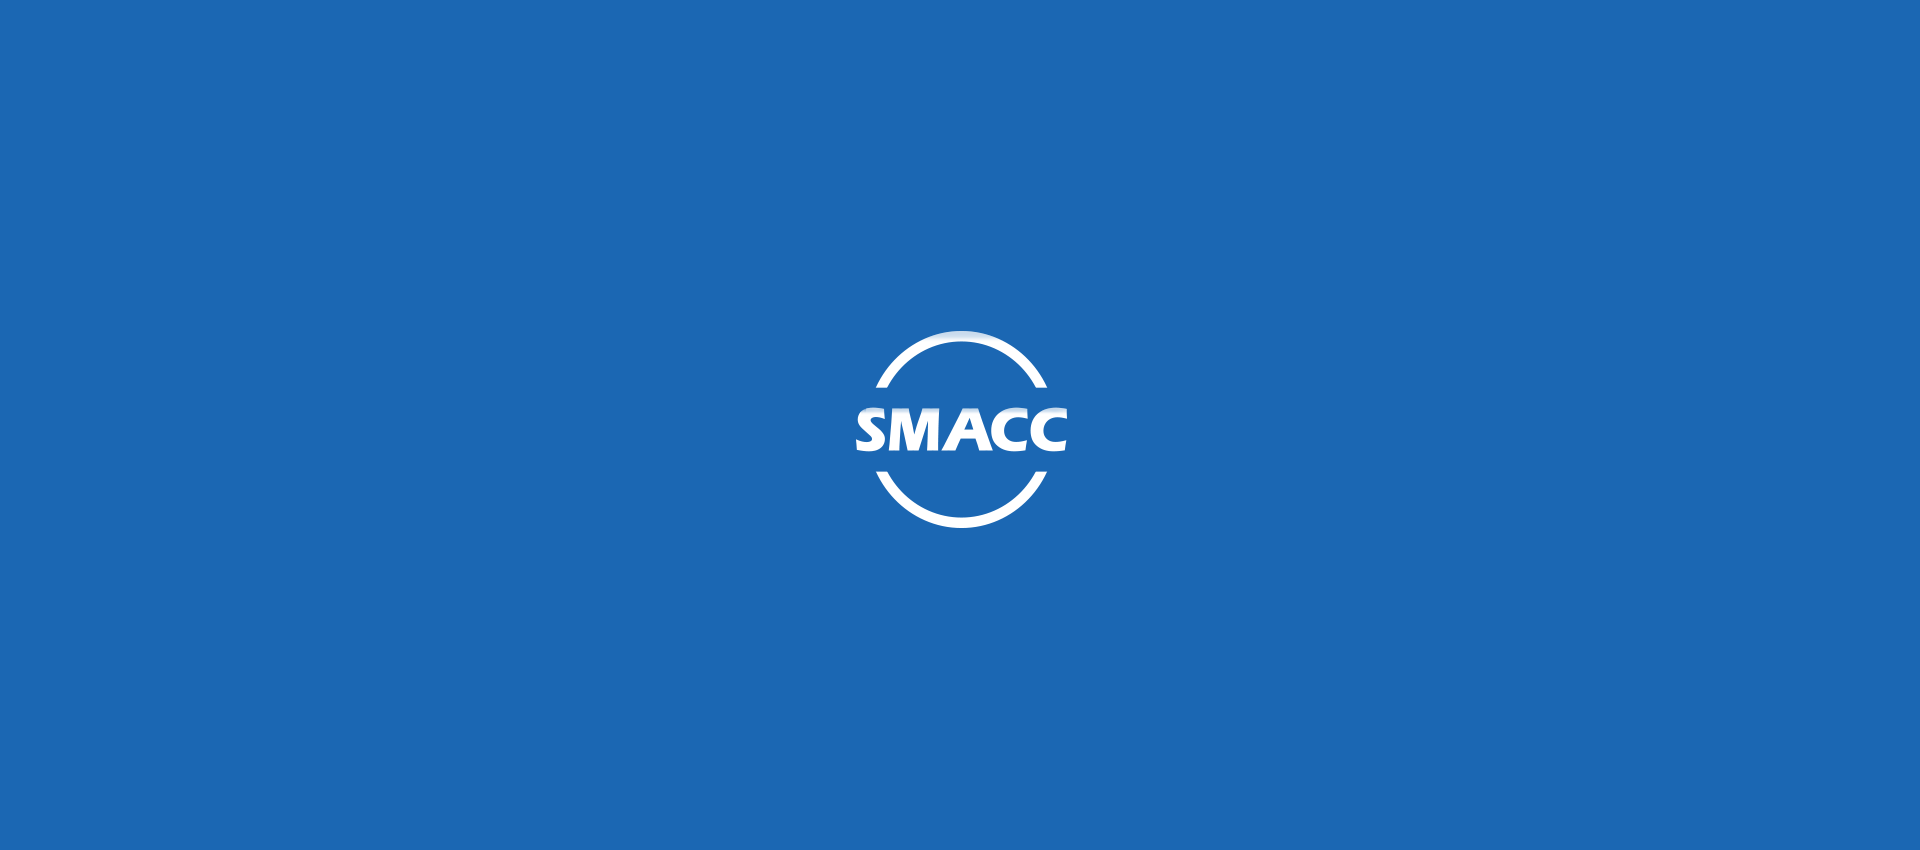 Download SMACC Software Update